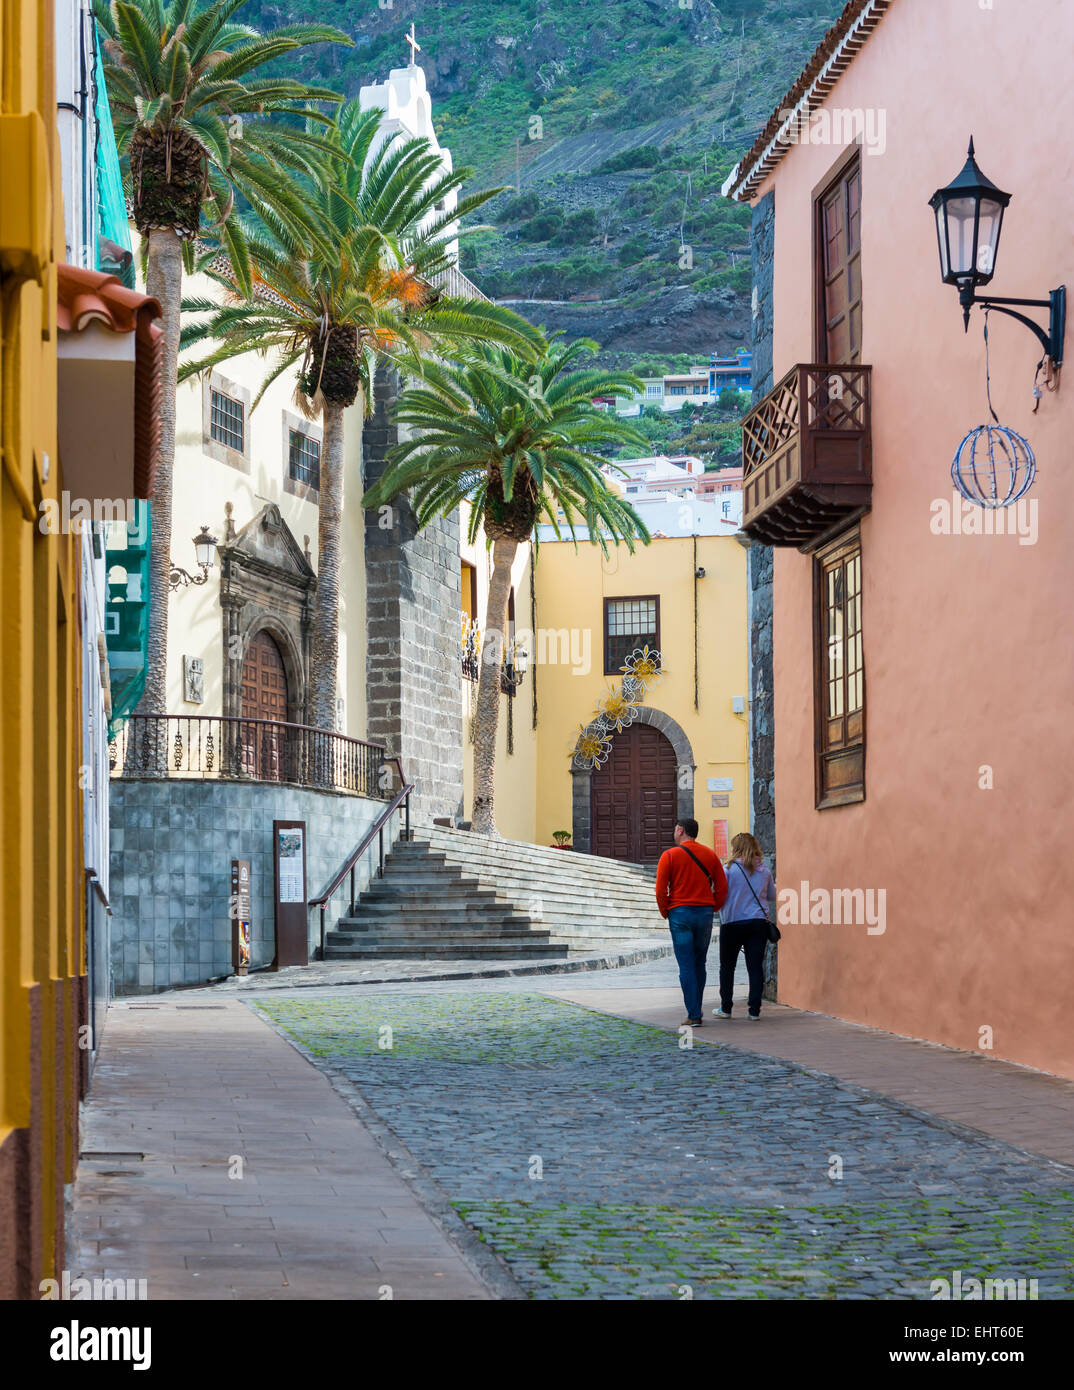 Street in Garachico on the isle of Tenerife in Spain with palm trees and church. Stock Photo